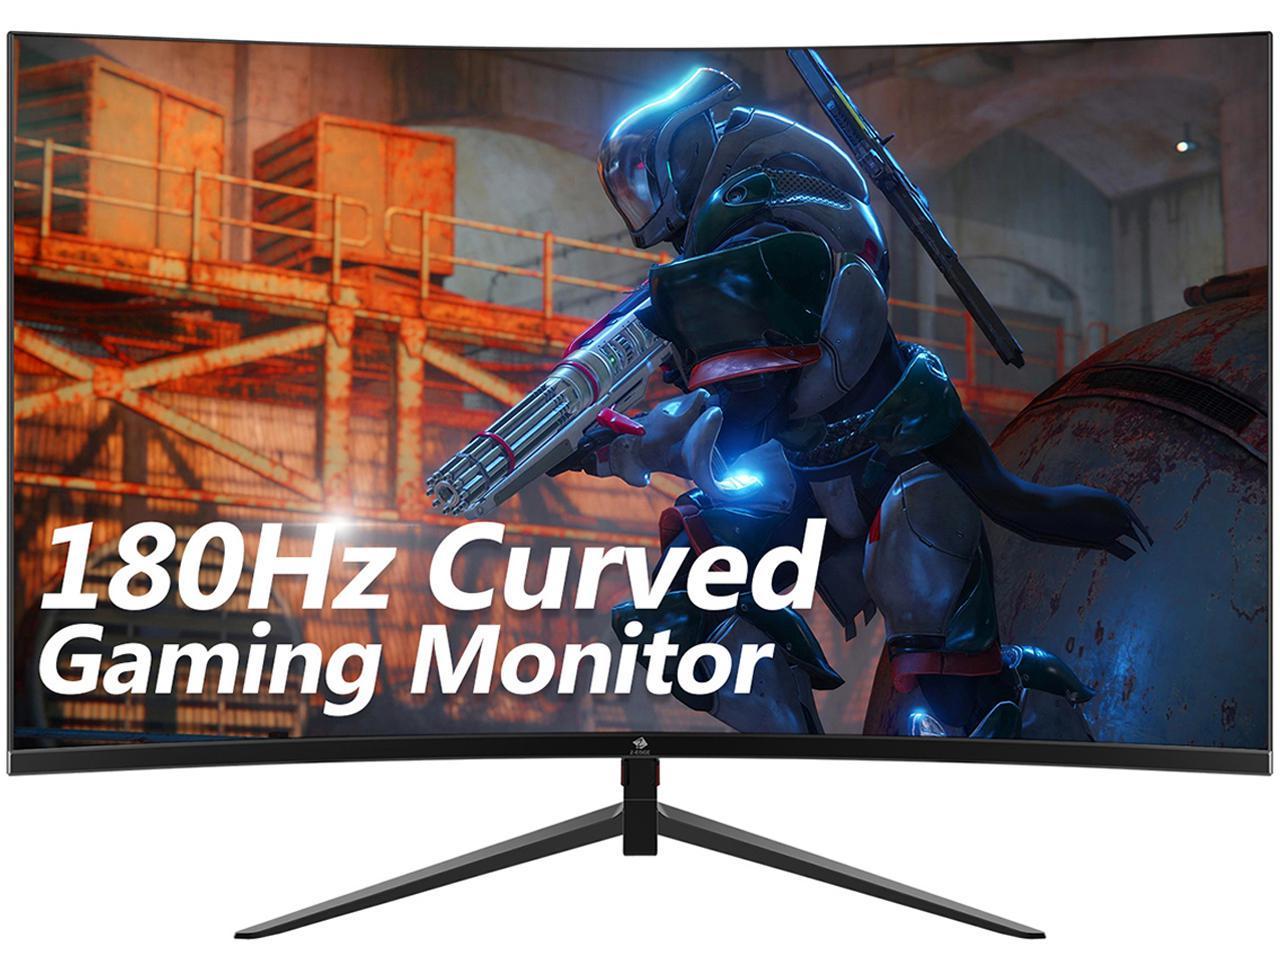 Z-EDGE UG24 24" 1080P Full HD 180Hz 1ms Curved Gaming Monitor, FreeSync, HDR10 compatible, HDMI 2.0, DisplayPort 1.2, Eye Care with Low-Blue Light, Mountable, Ultra Thin Frame Newegg.com